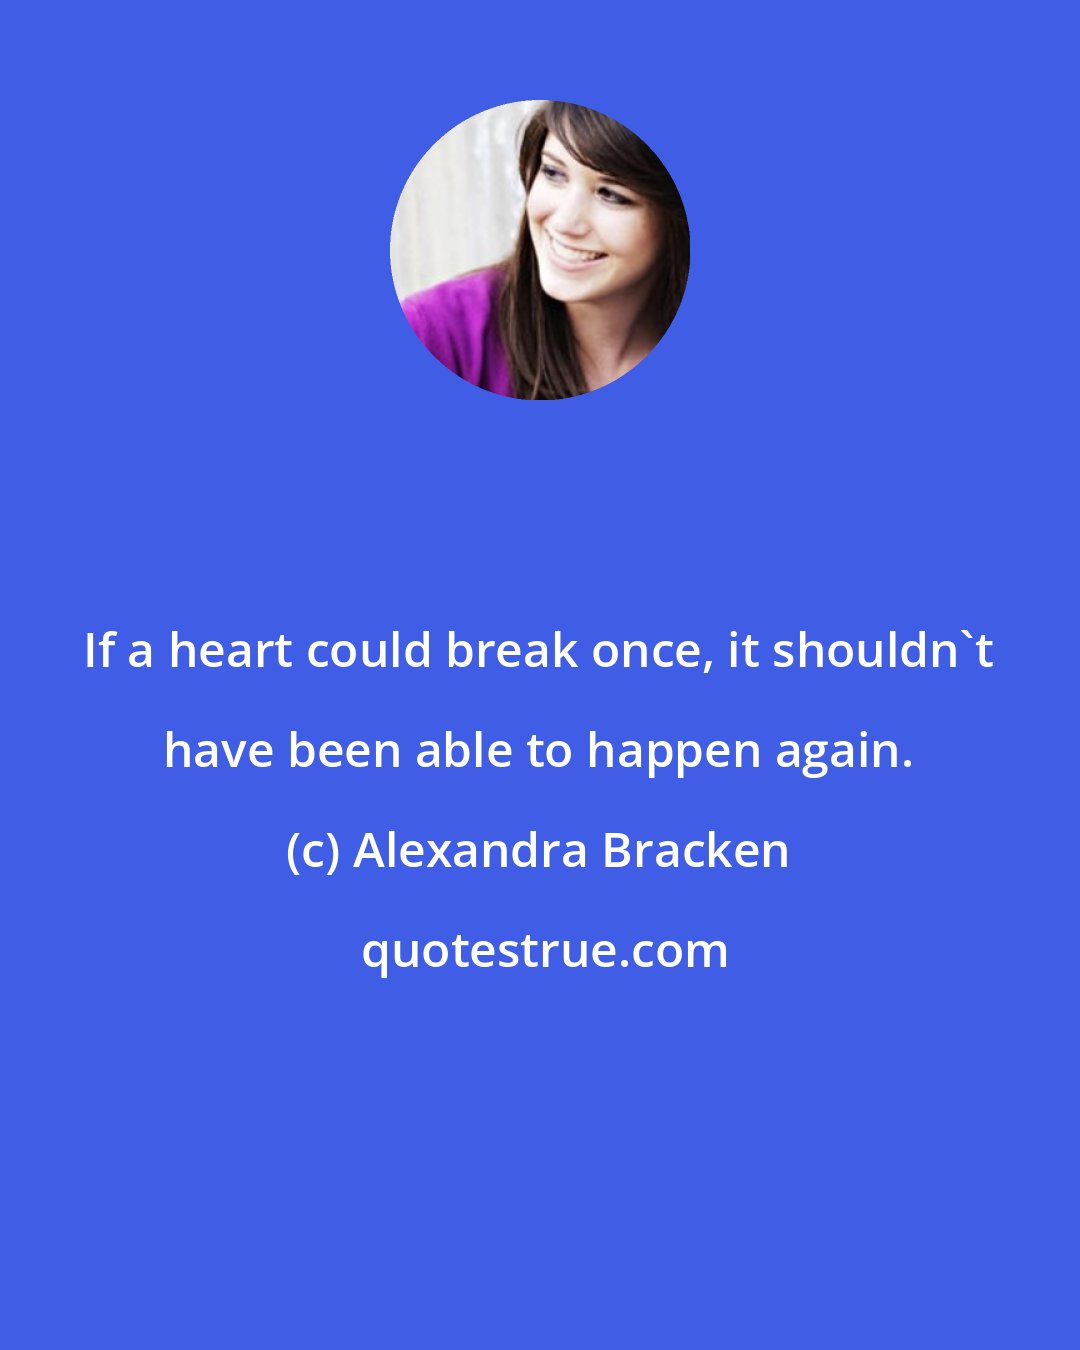 Alexandra Bracken: If a heart could break once, it shouldn't have been able to happen again.